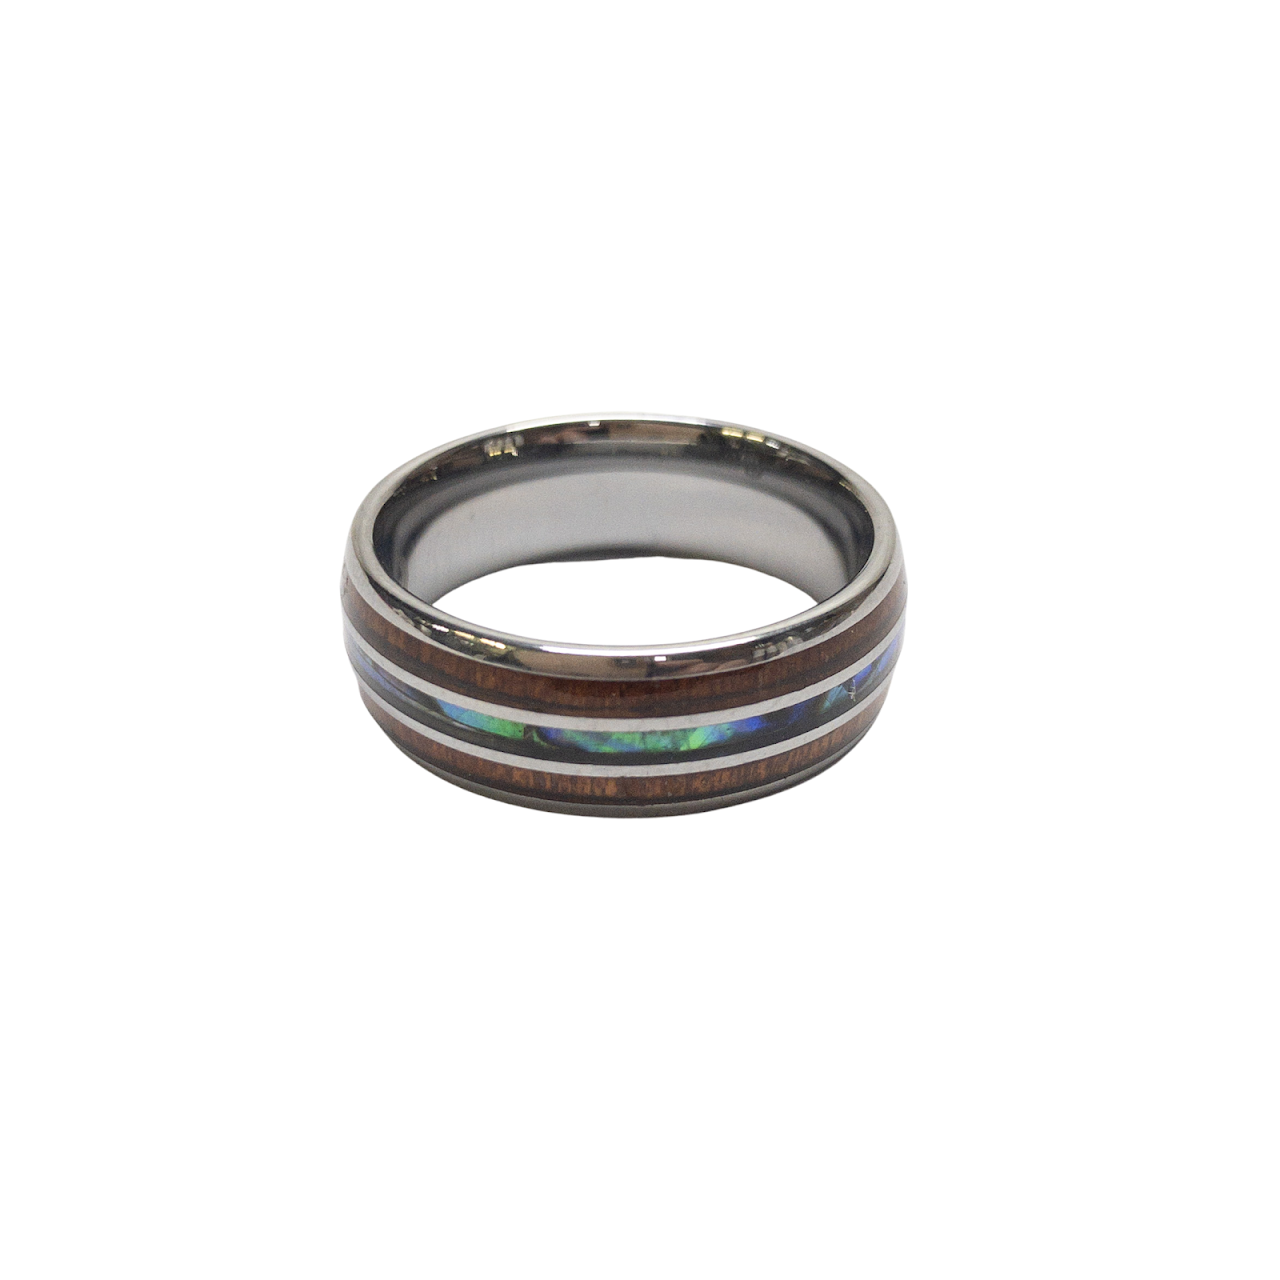 Manly Bands 'The Angler' Tungsten Carbide Ring